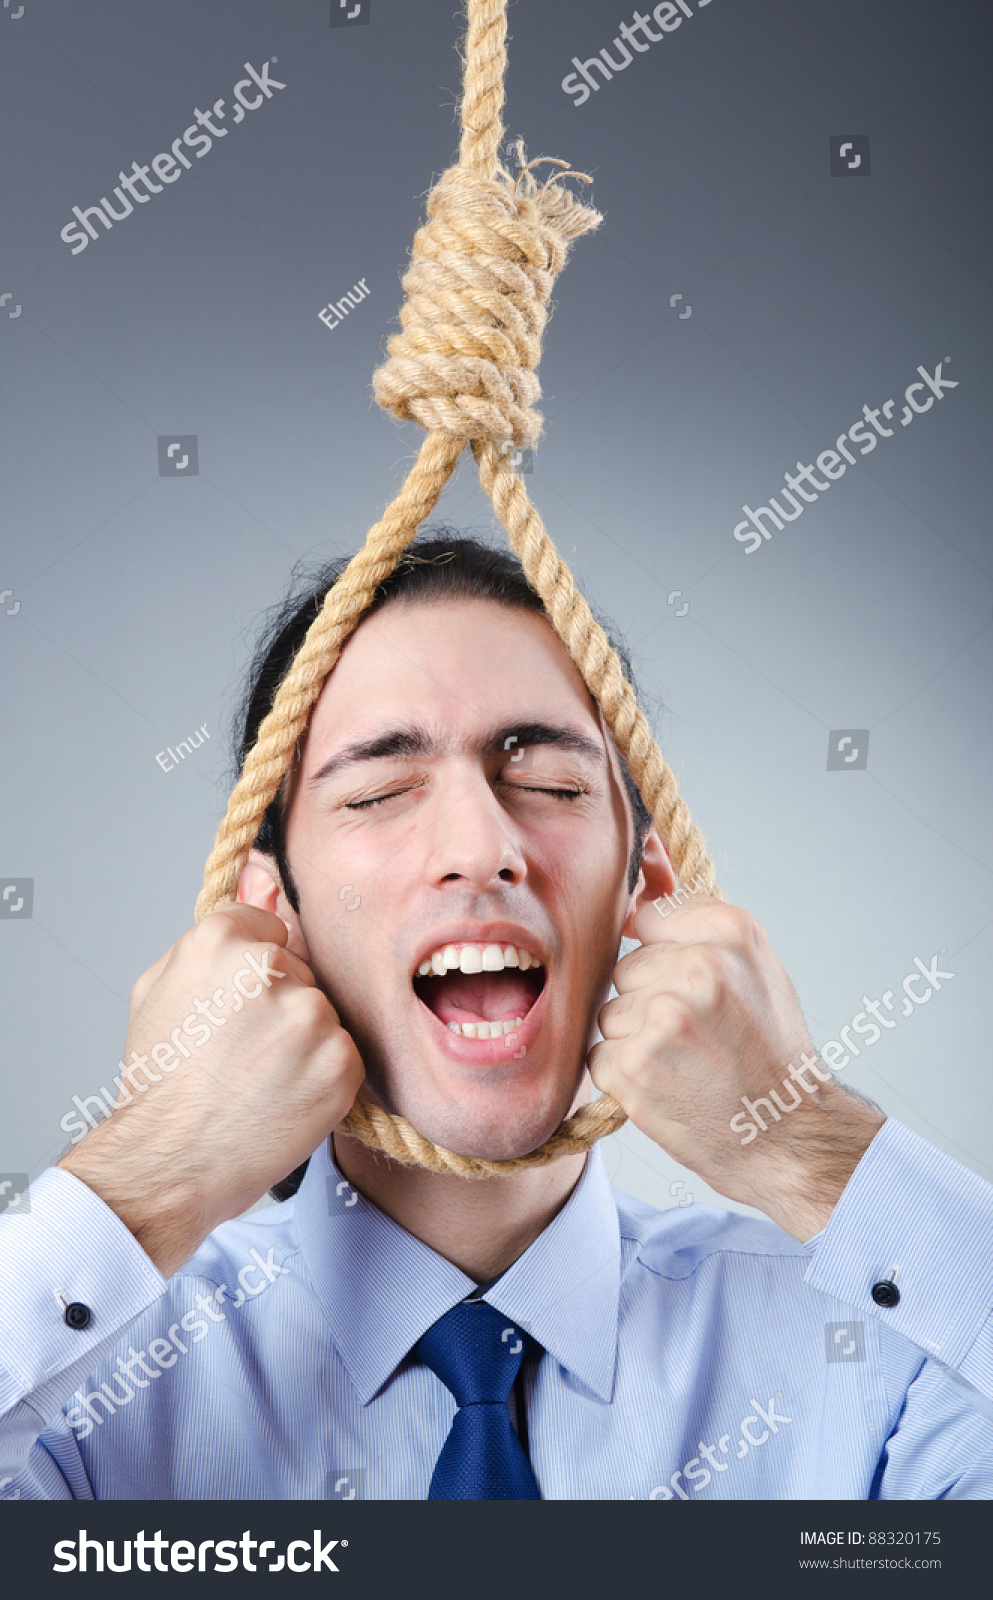 stock-photo-businessman-committing-suicide-through-hanging-88320175.jpg